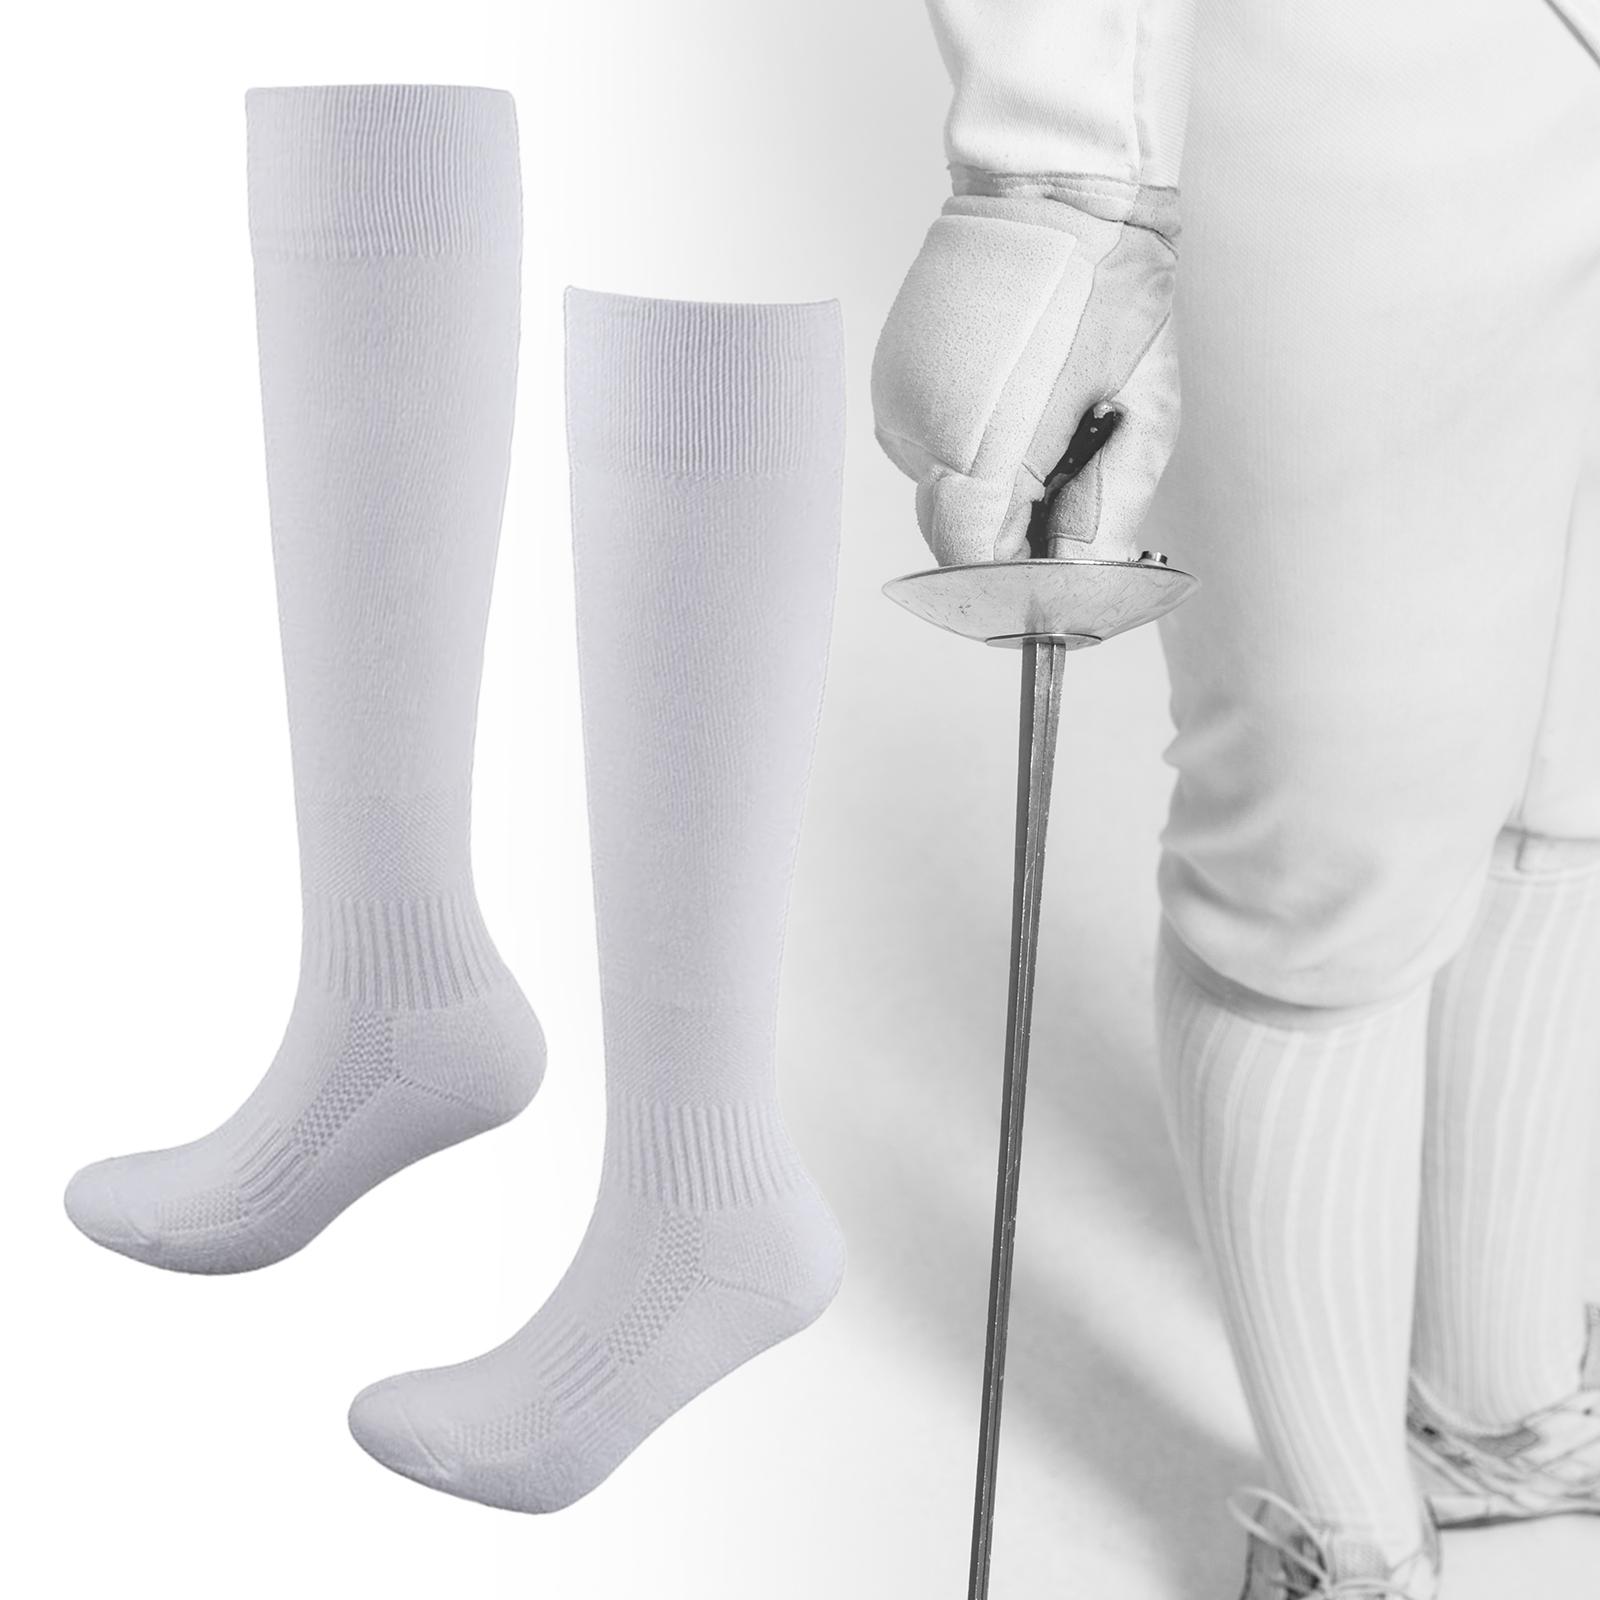 Fencing Socks Unisex Stretchy Unisex Fencing Stockings for Girls Adult L White 